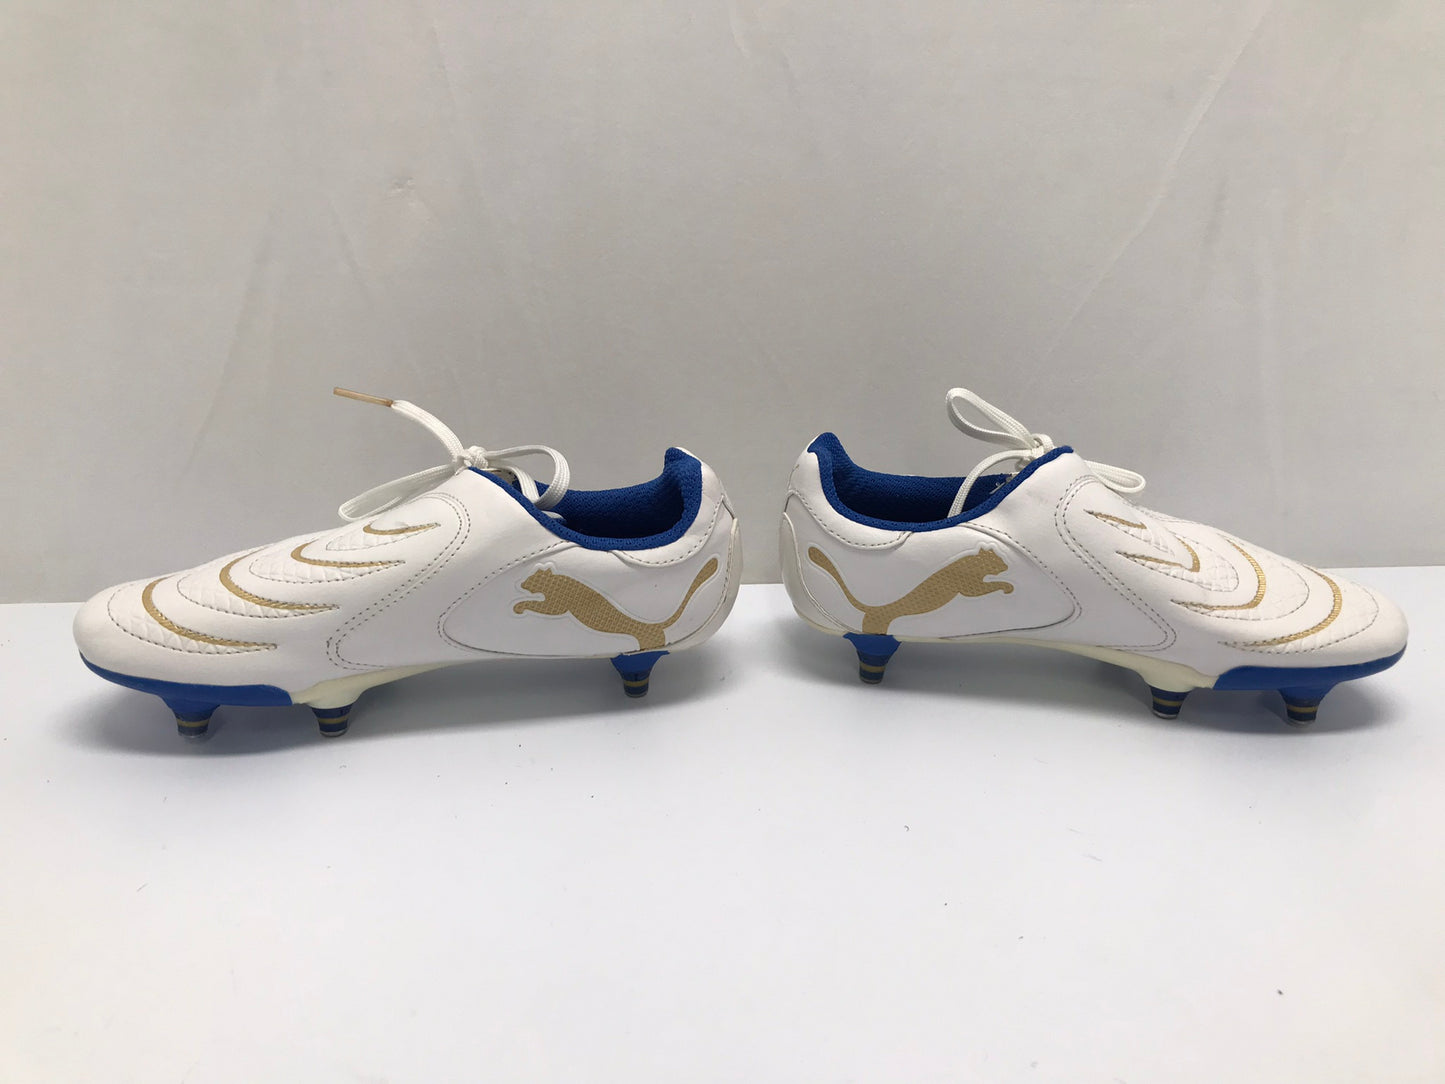 Soccer Shoes Cleats Child Size 5 Puma White Blue GoldMetal Tips As New